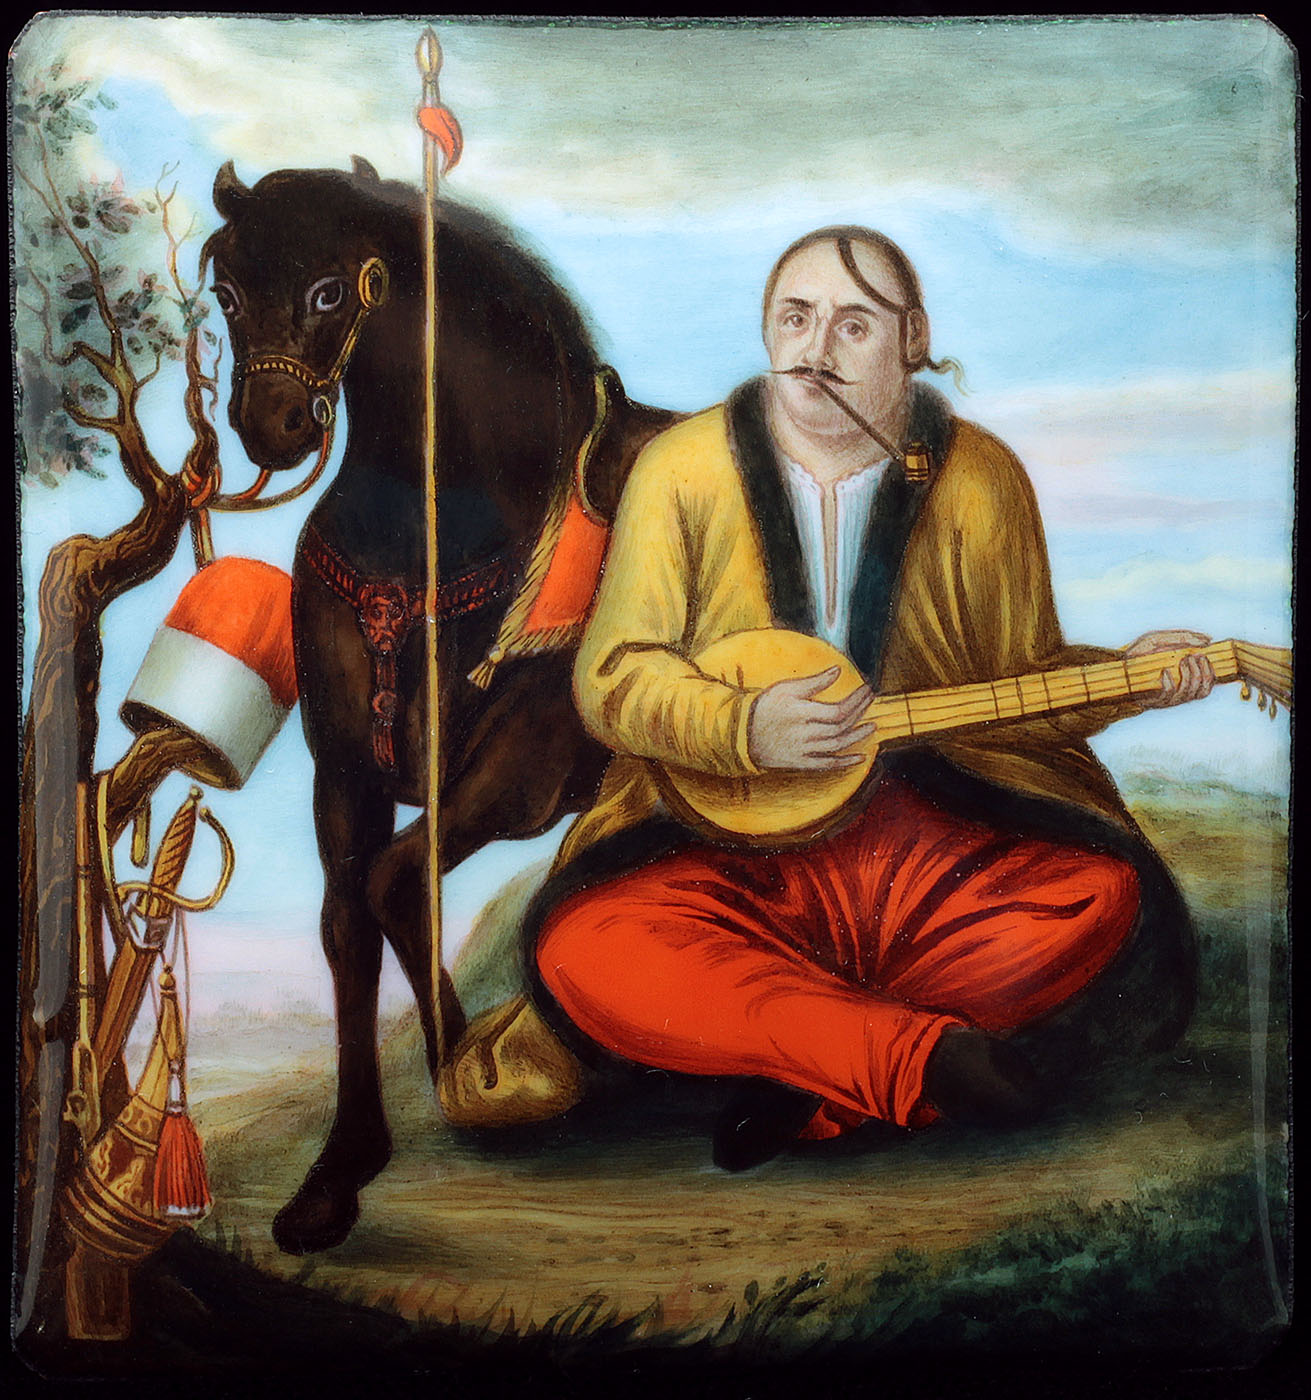 'Cossack Mamai' after uknown painter from 18th century